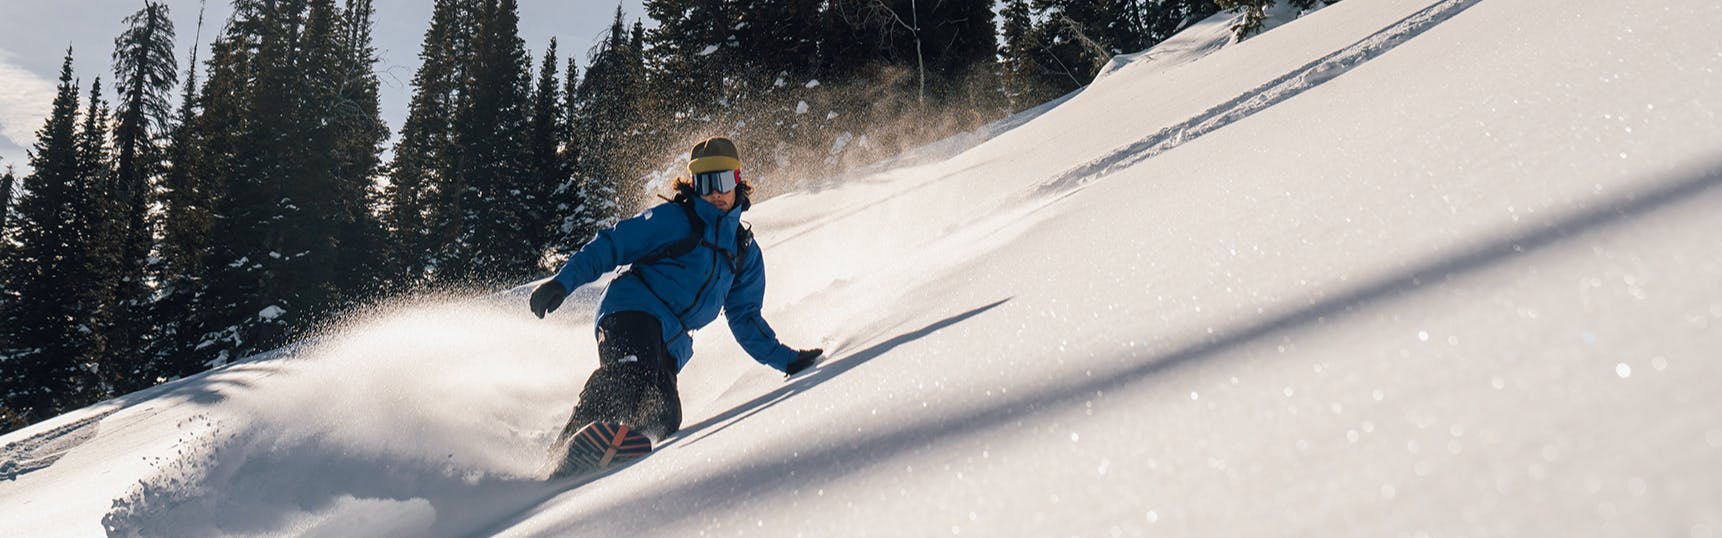 Snowboards How to Choose the Best Snowboard for You Curated